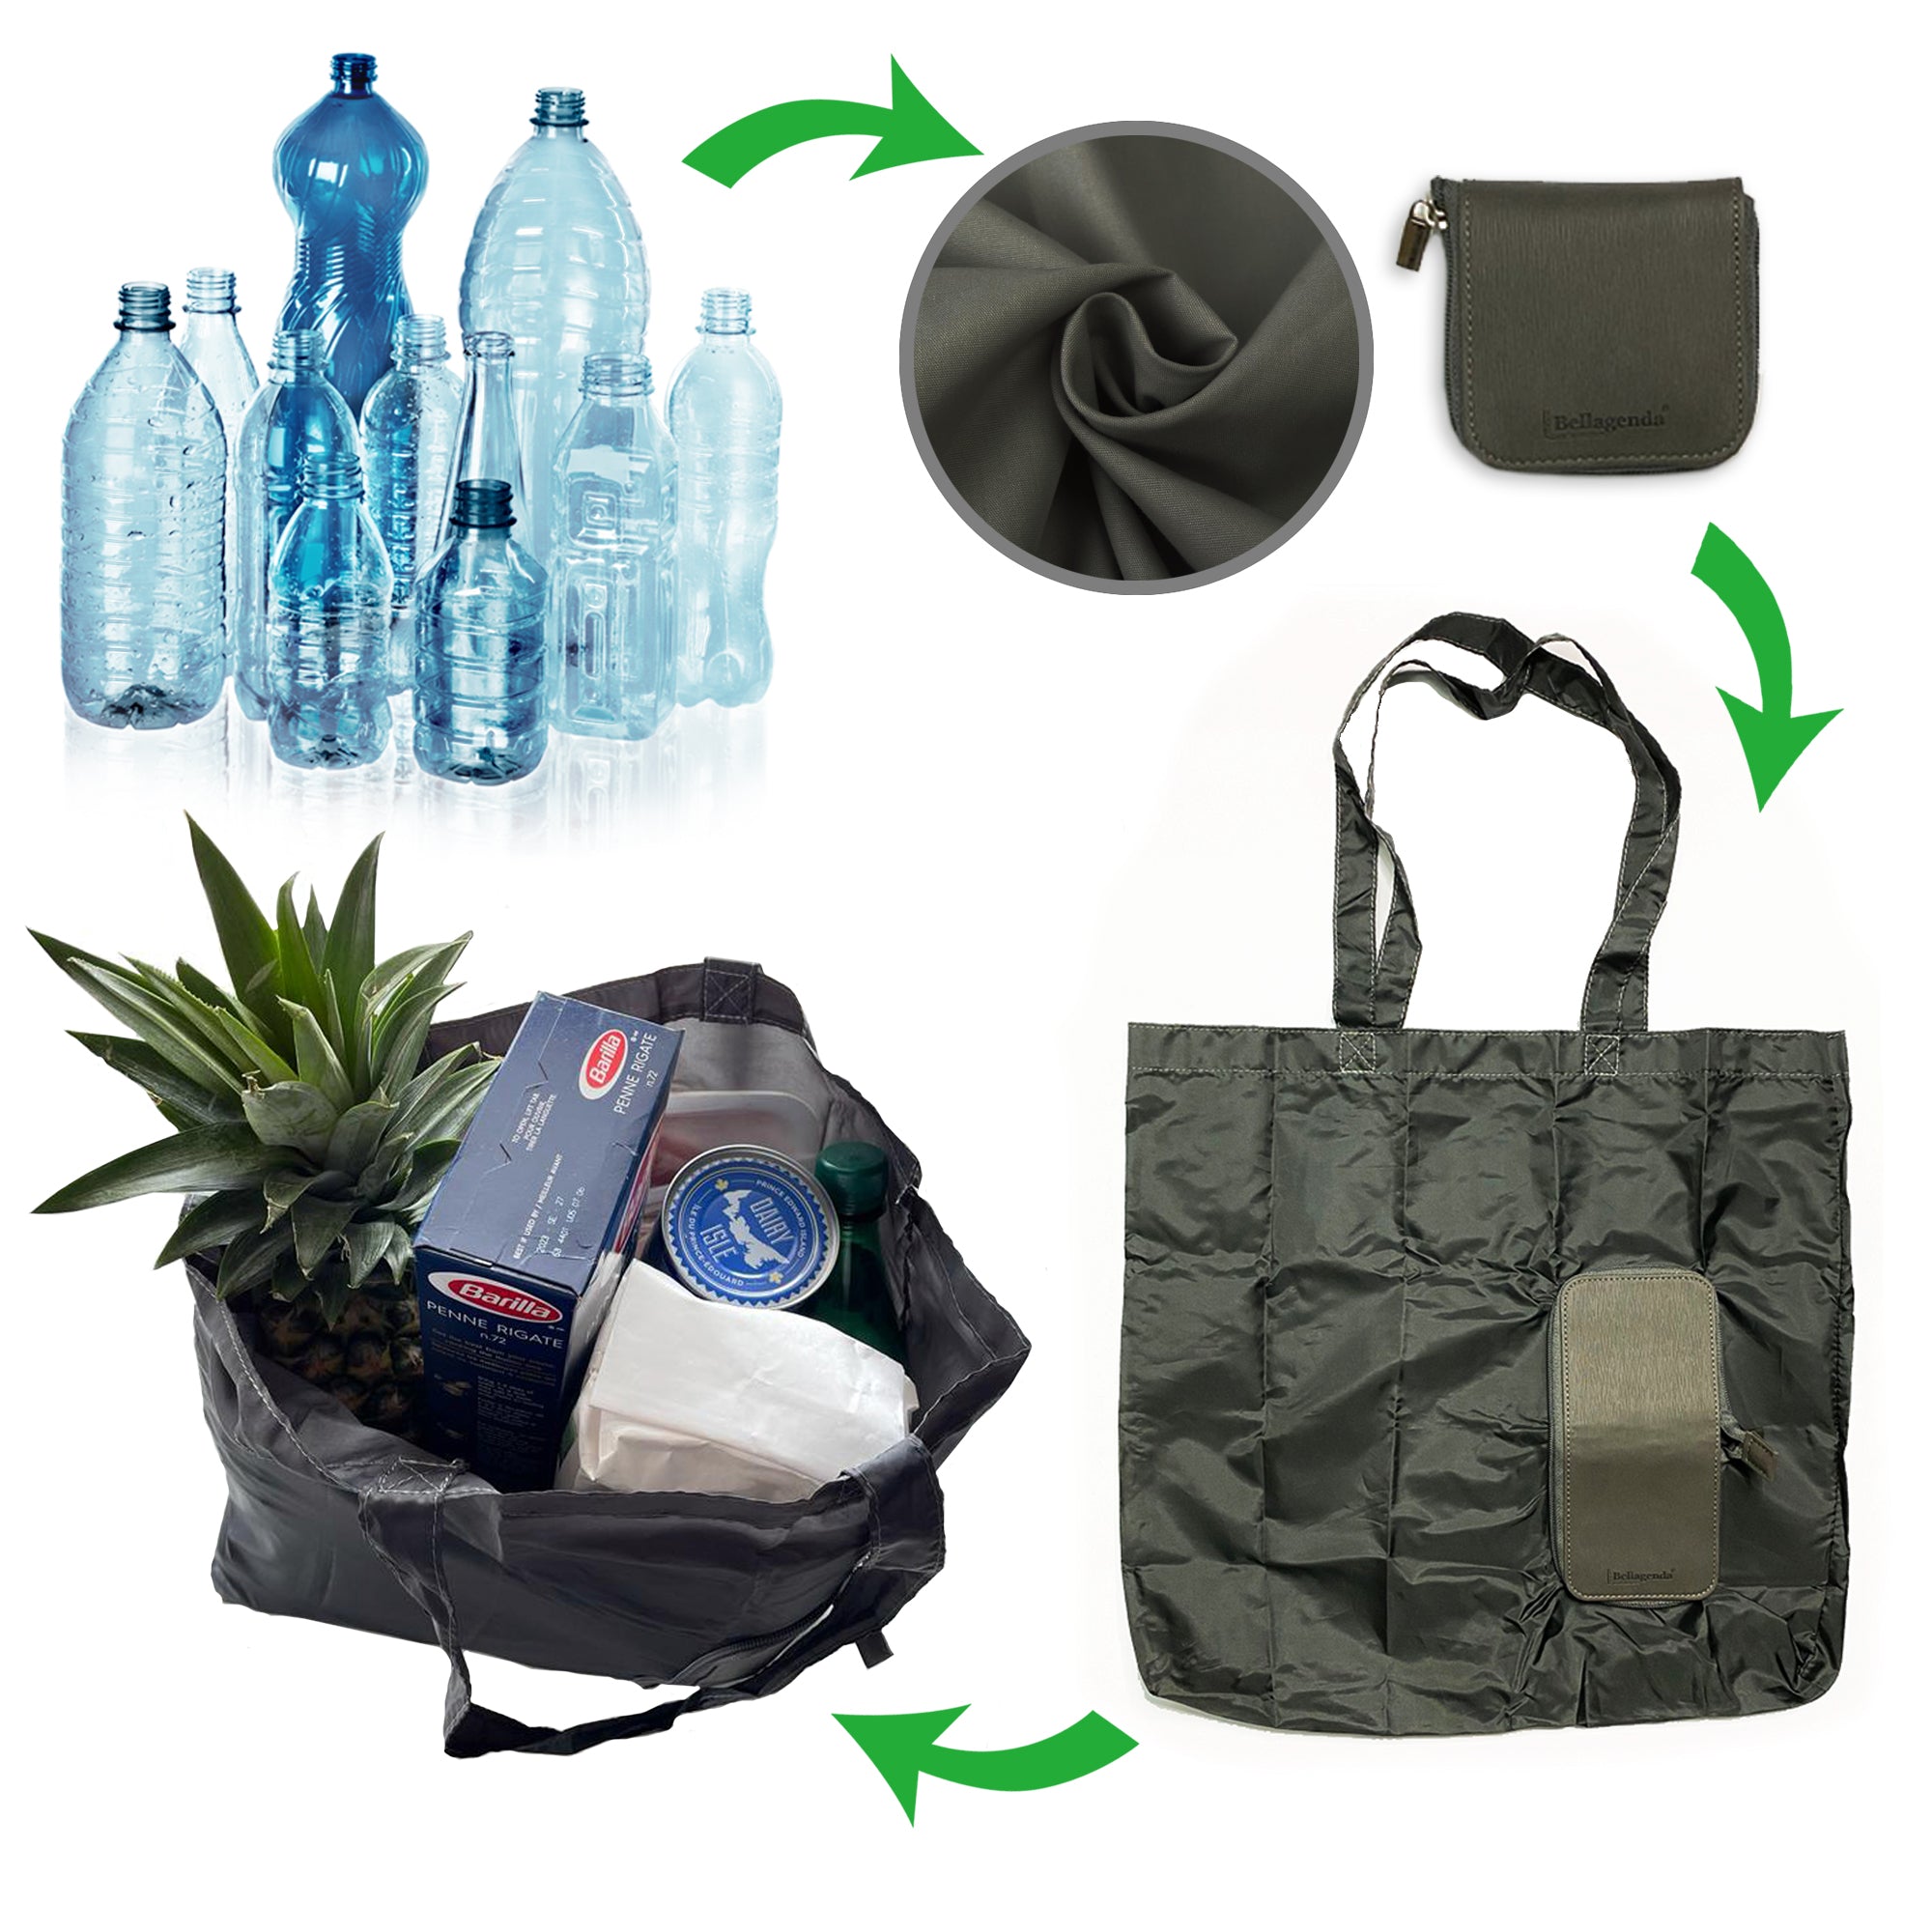 Recycled material from water bottle